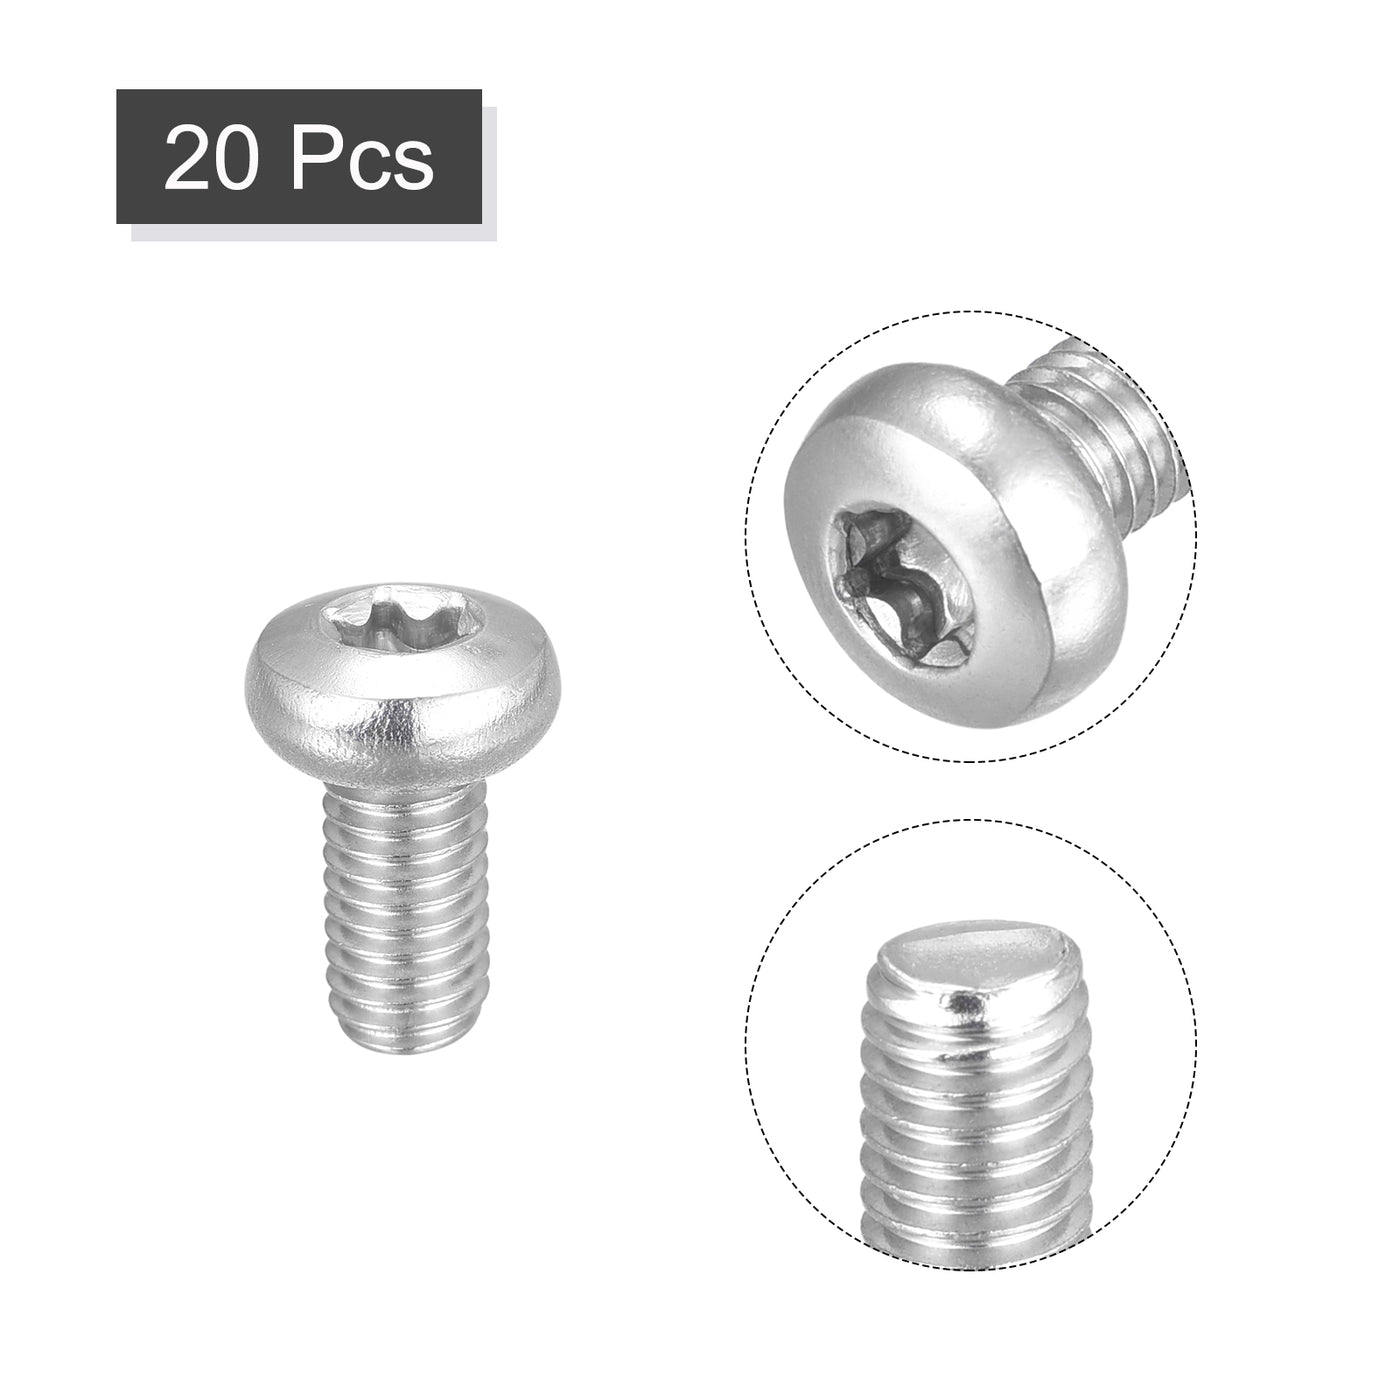 uxcell Uxcell M5x10mm Torx Security Machine Screws, 20pcs 316 Stainless Steel Pan Head Screw